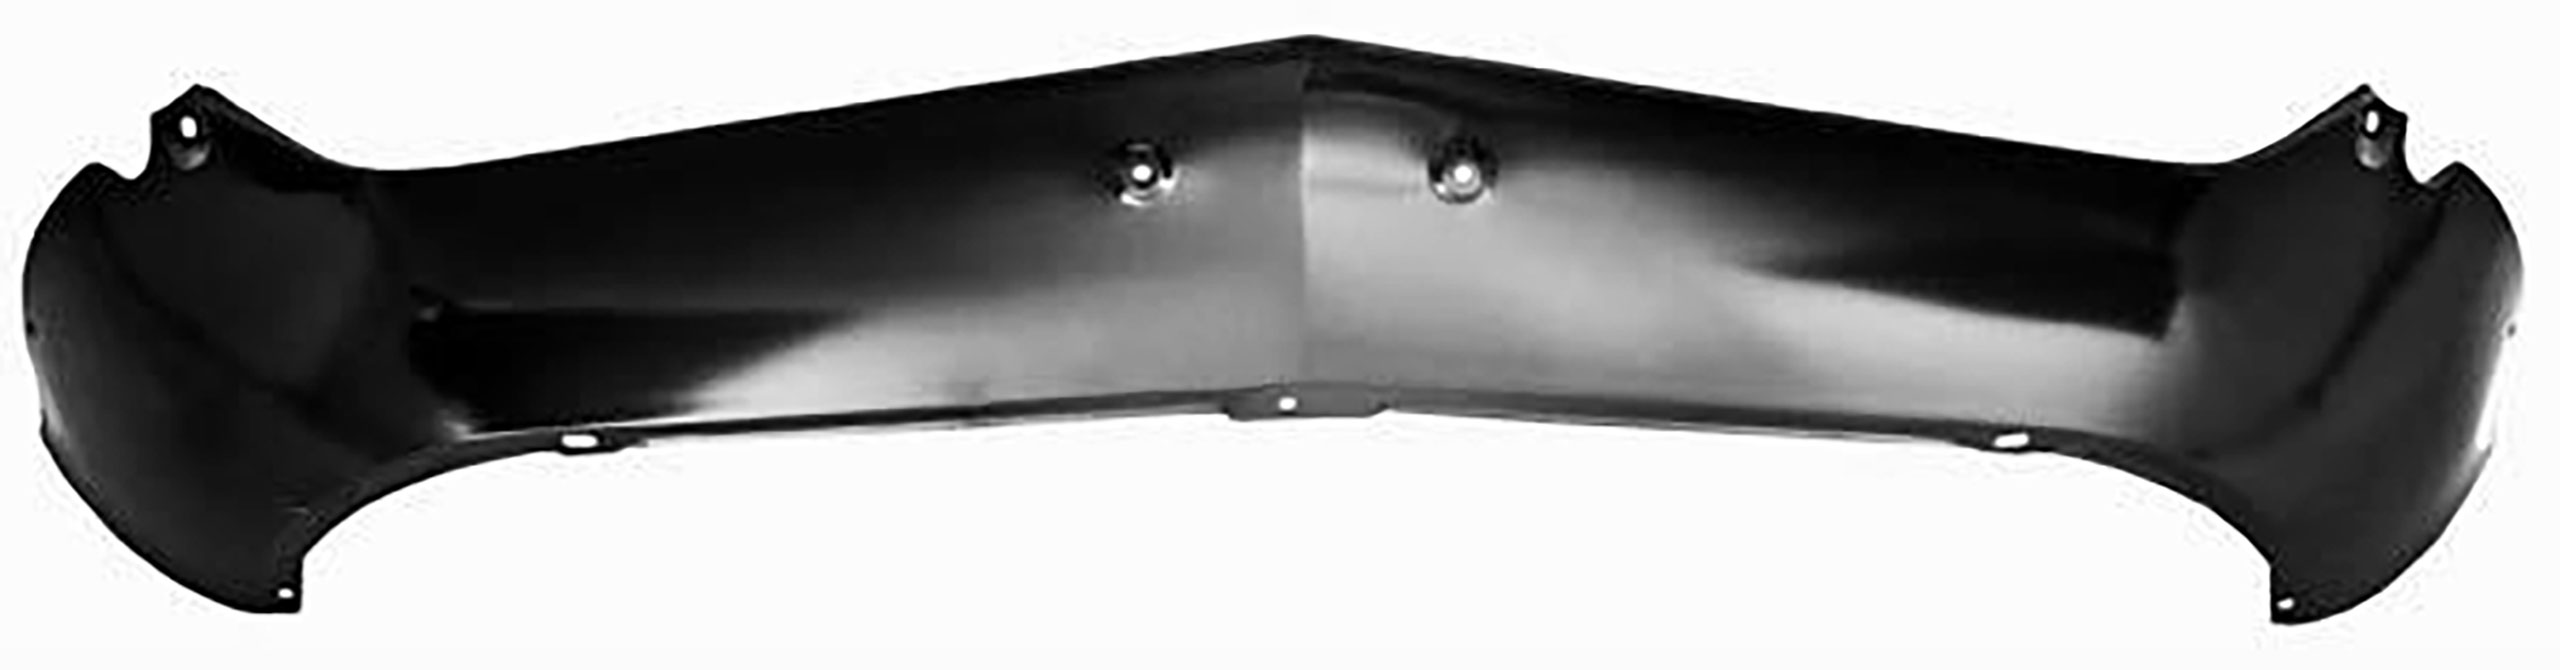 First Generation 1970 Ford Mustang Front Valance Panel - Dynacorn